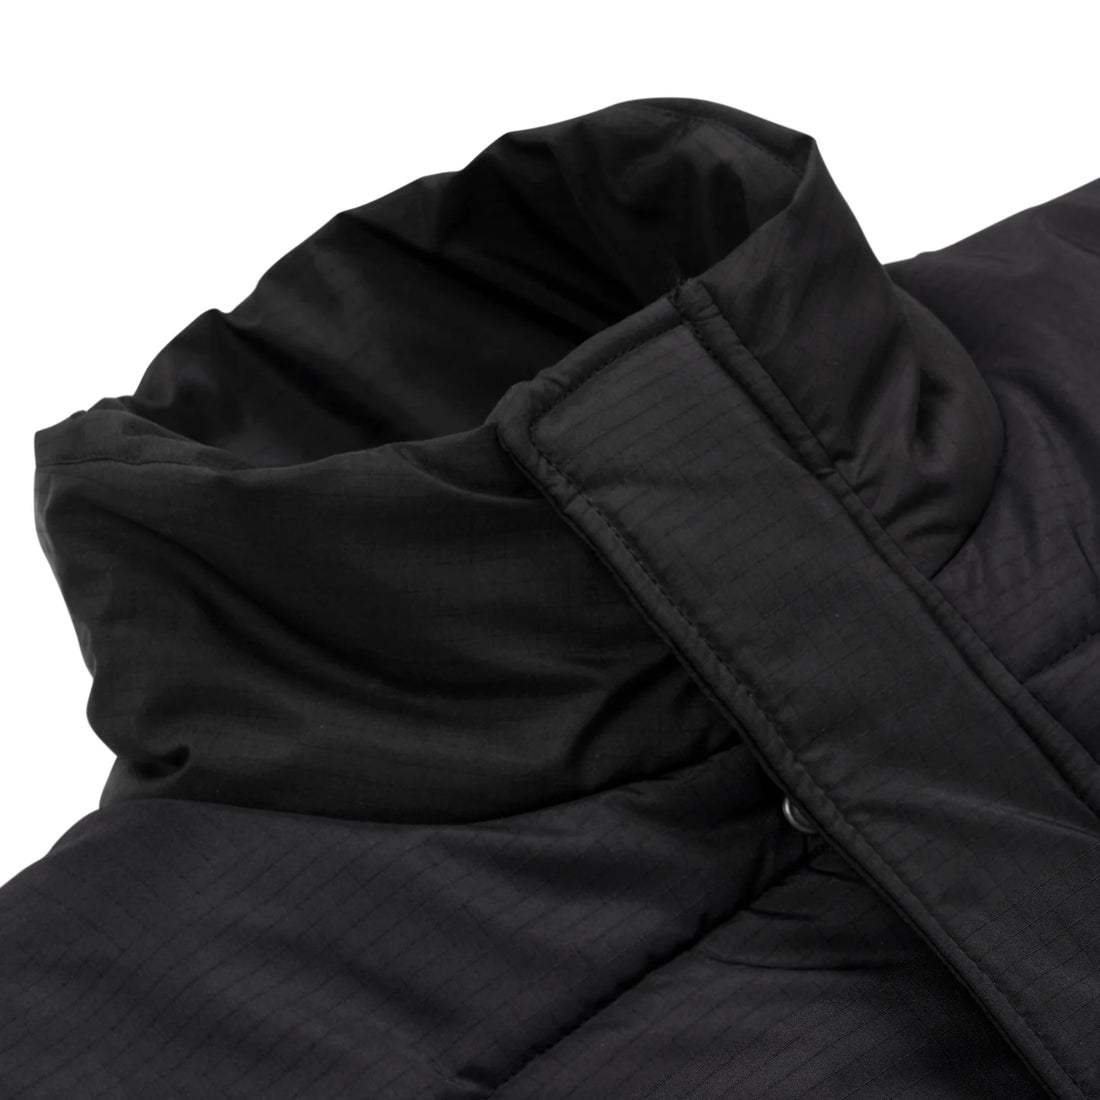 THE BLACK PUFFER JACKET